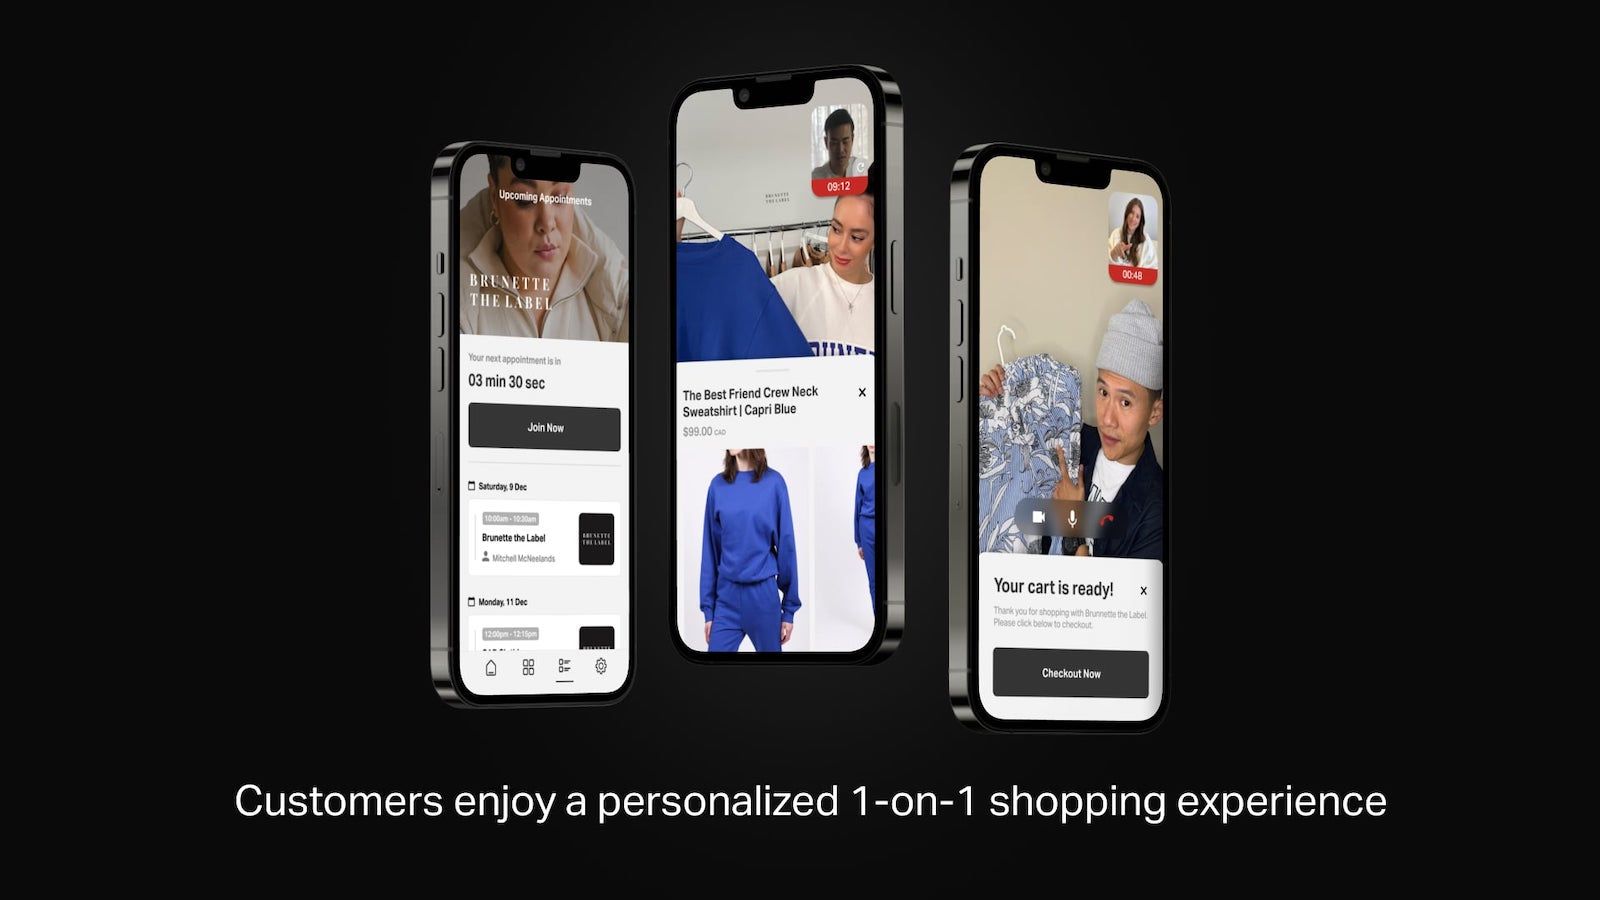 Customer's enjoy a personalized 1-on-1 shopping experience